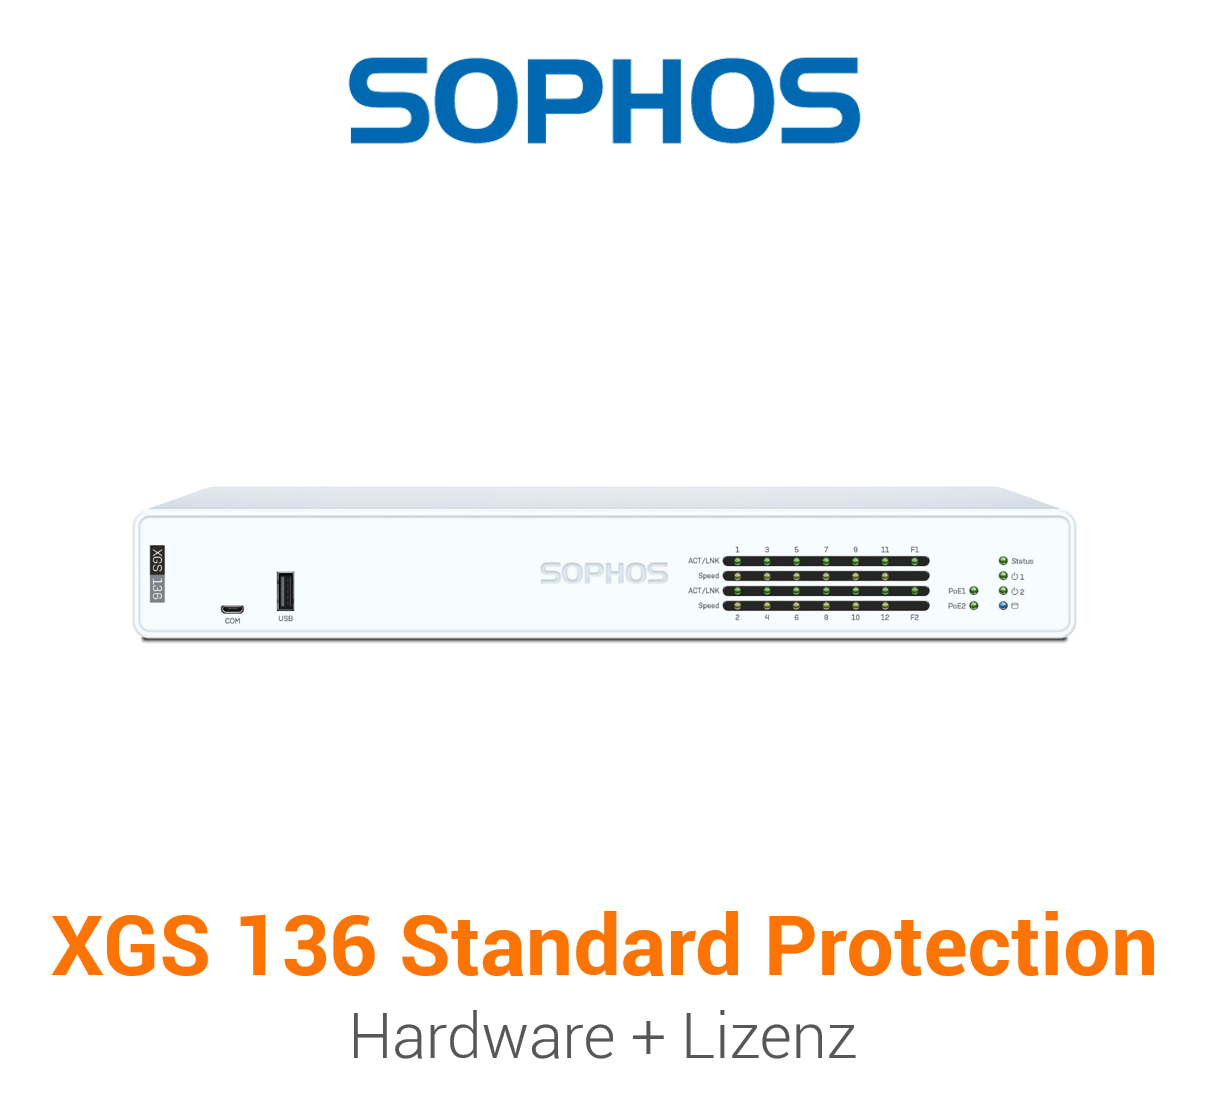 Sophos XGS 136 mit Standard Protection